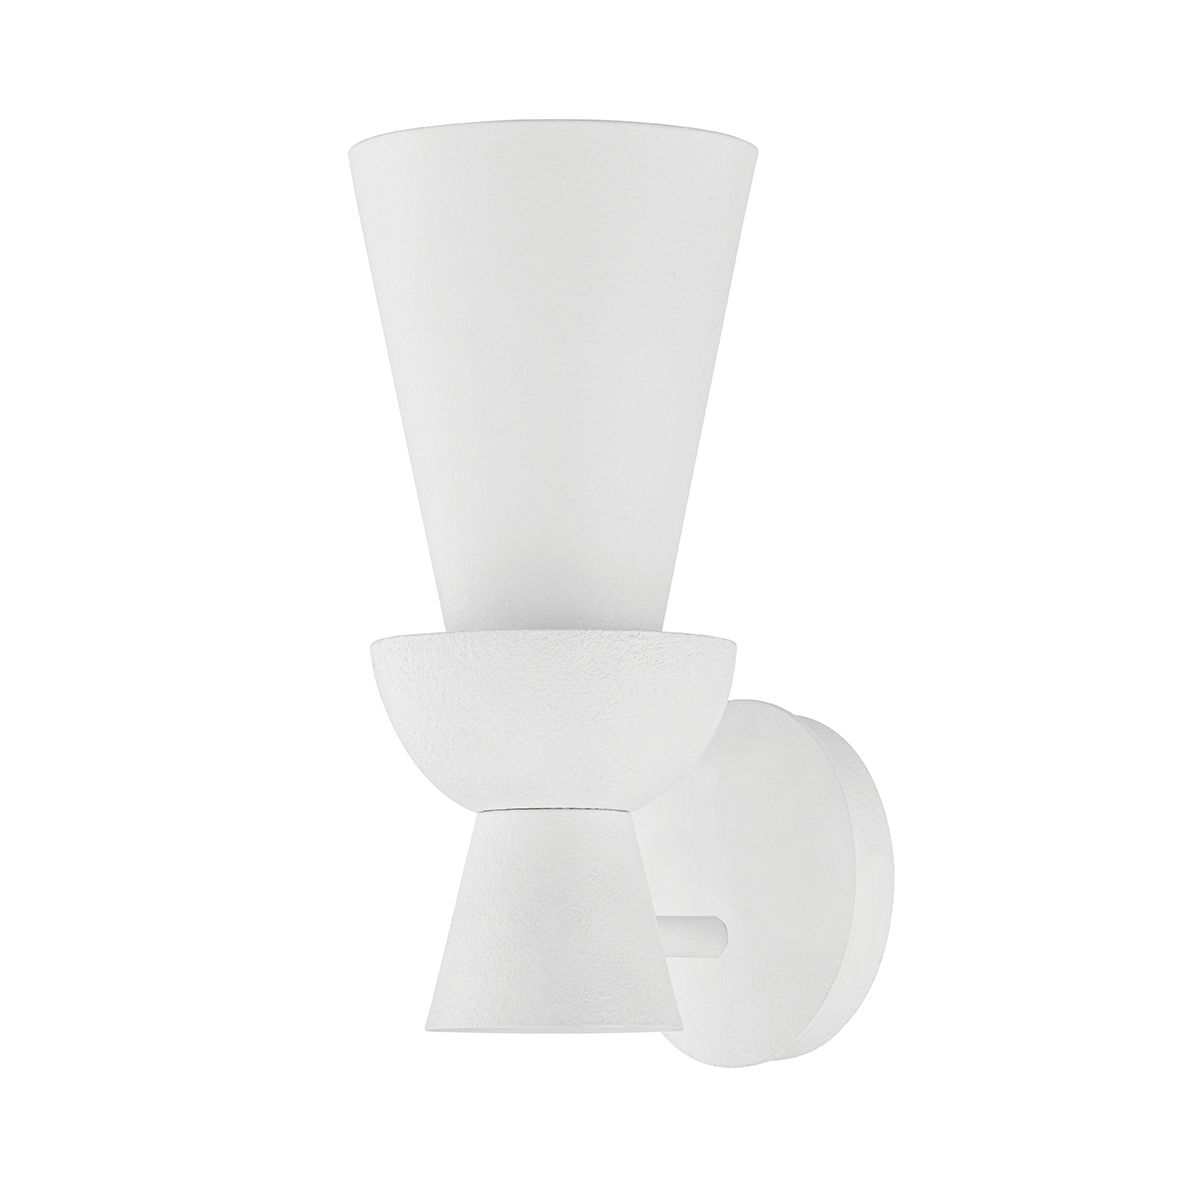 FLORENCE 12 in. Armed Sconce White finish